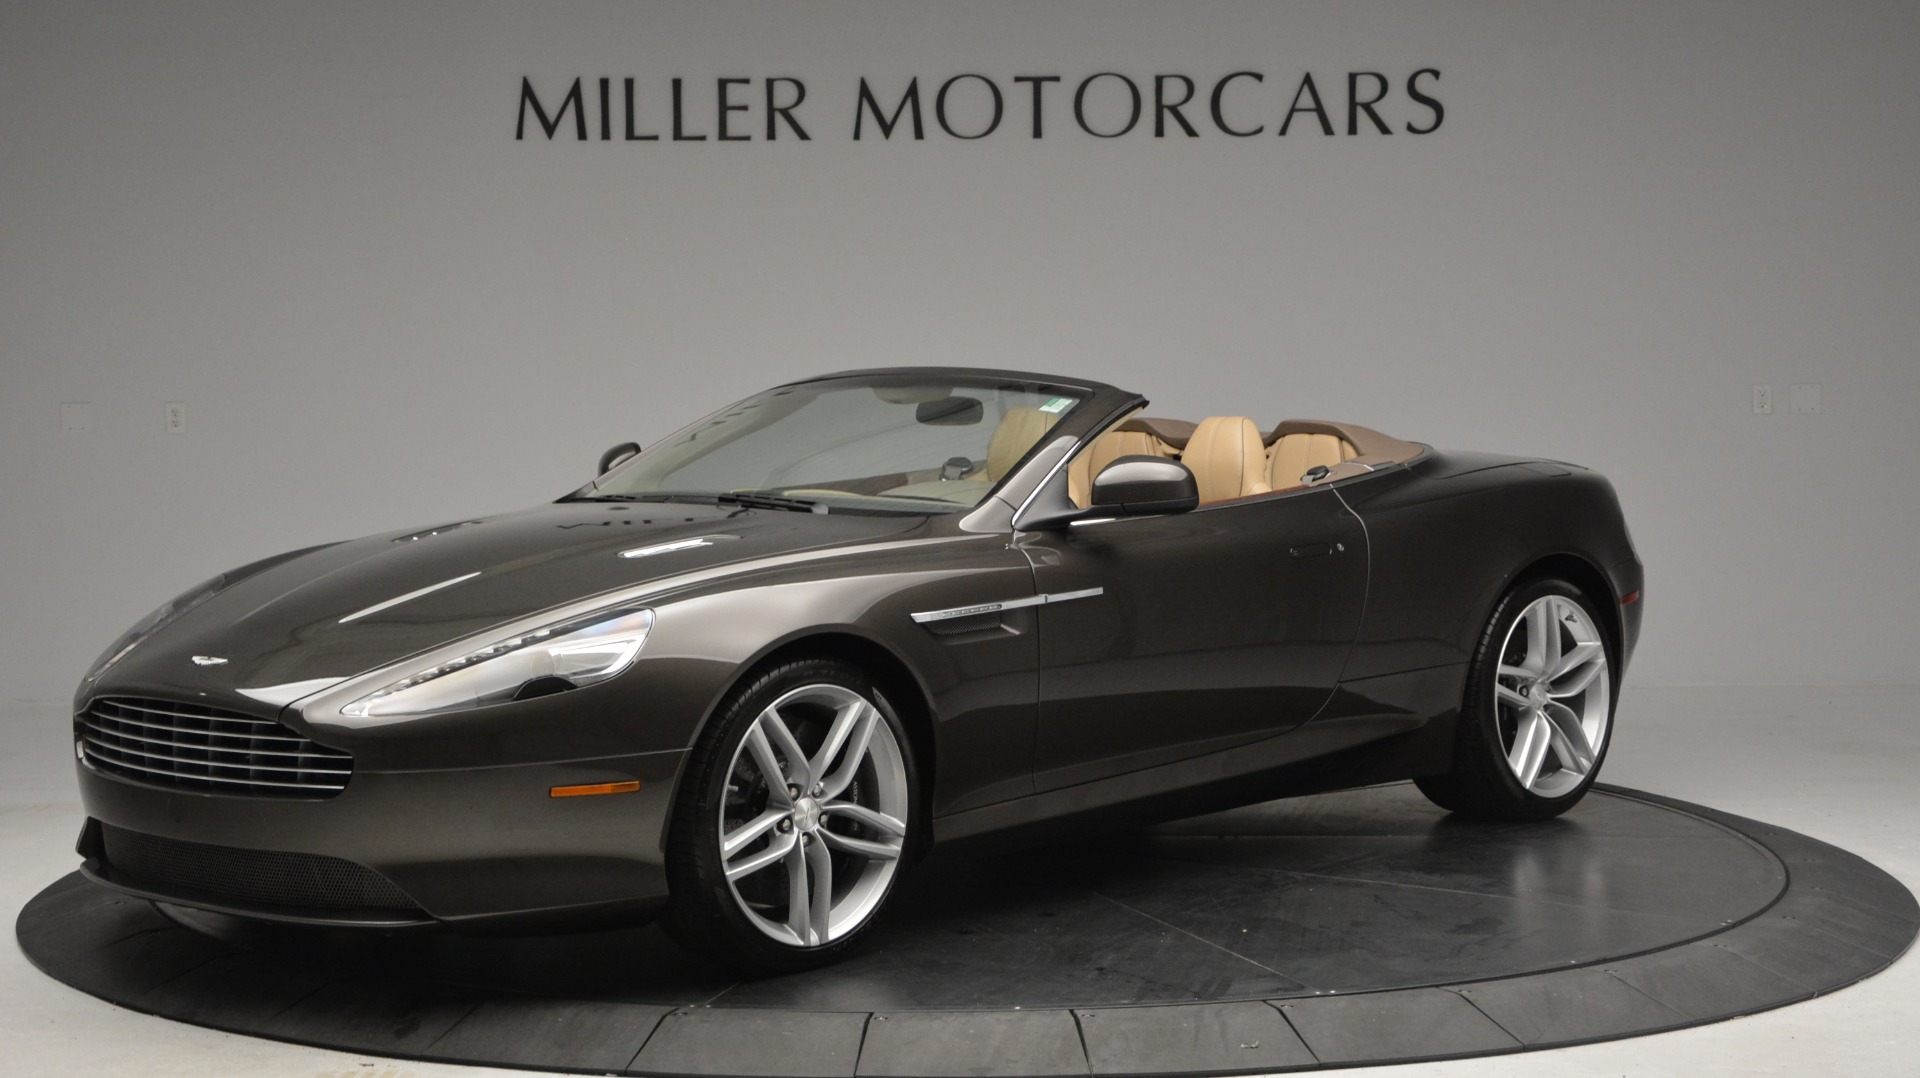 Used 2012 Aston Martin Virage Convertible for sale Sold at Bugatti of Greenwich in Greenwich CT 06830 1